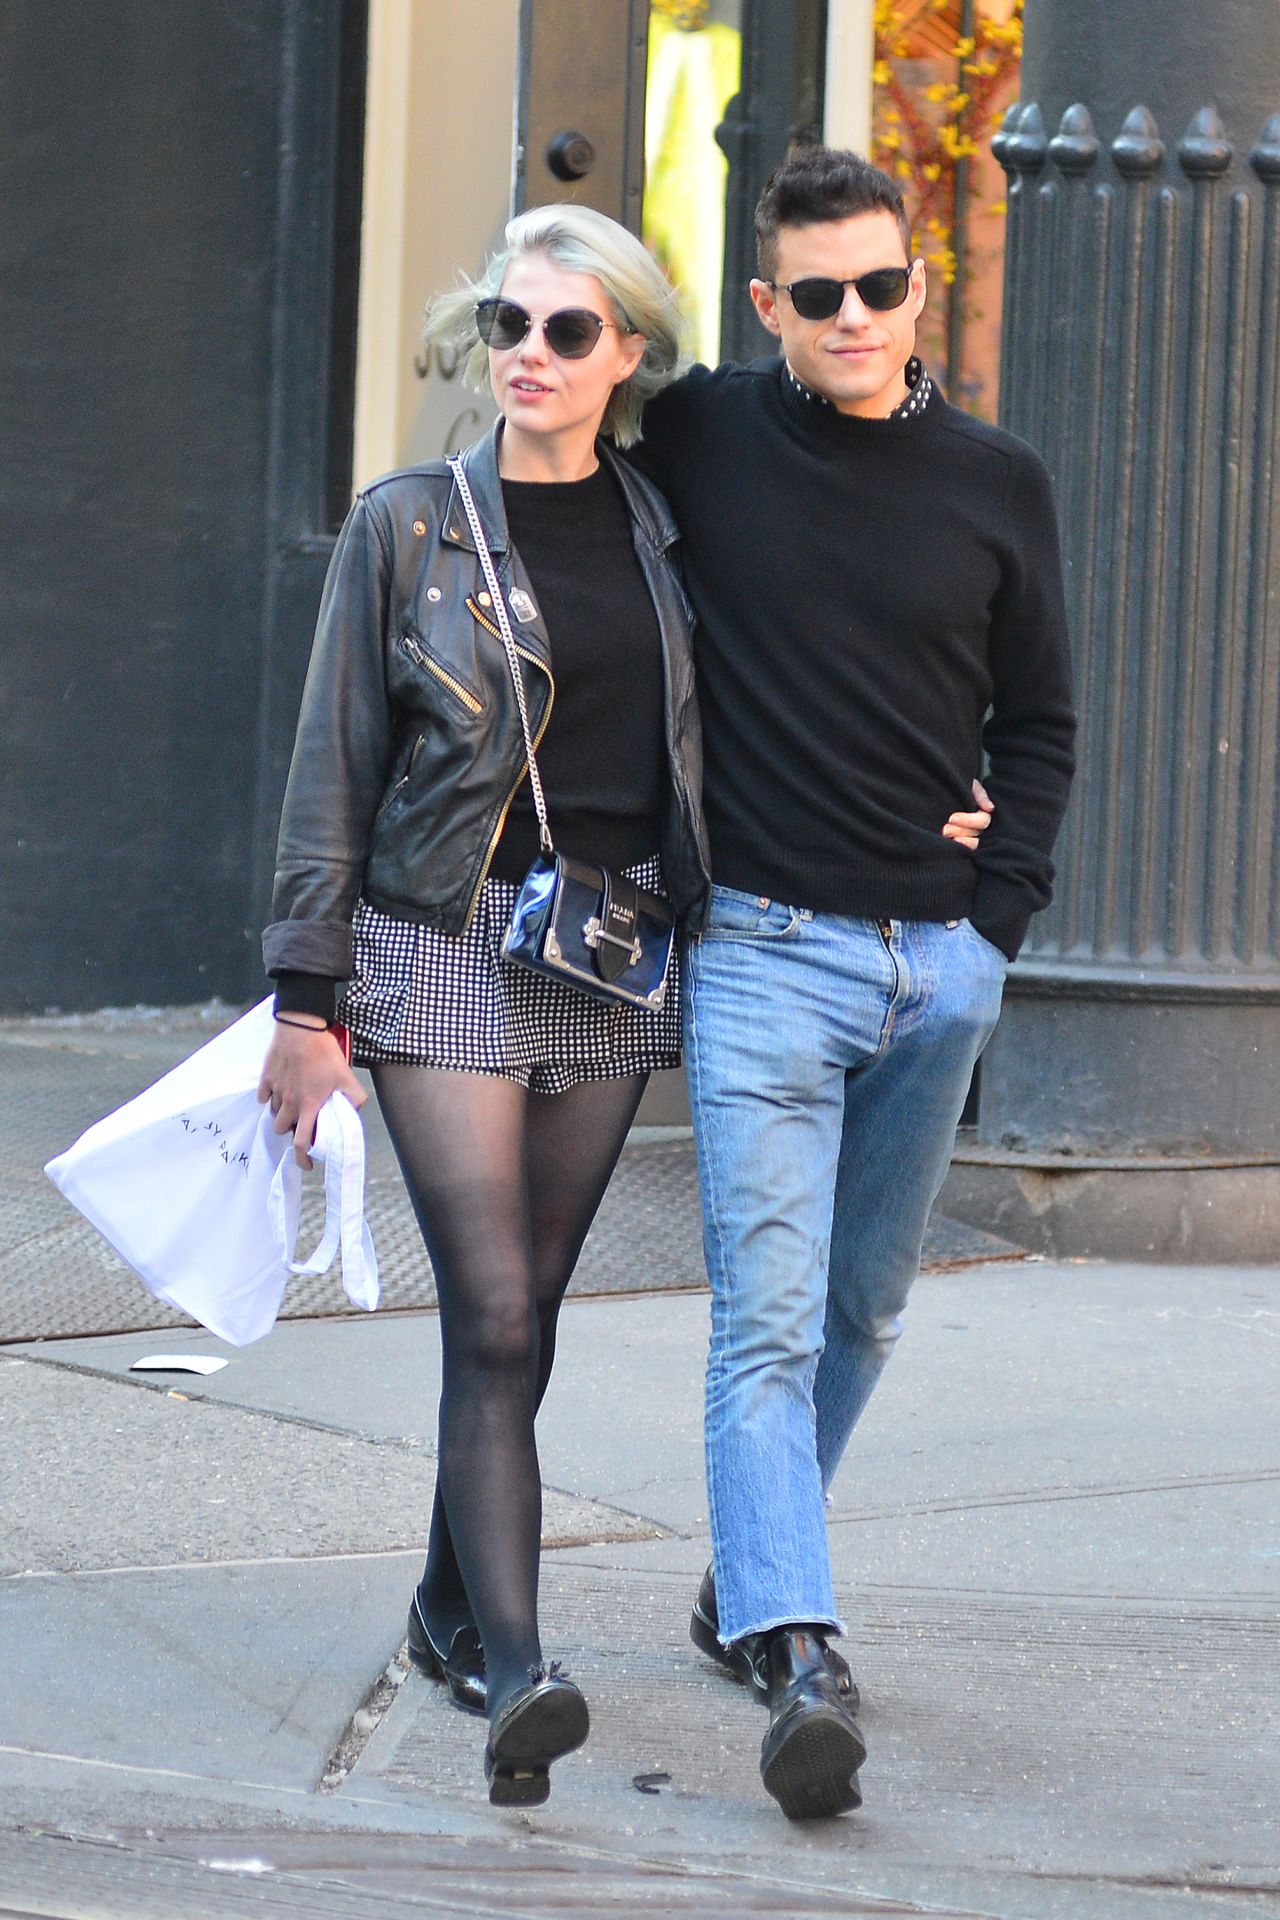 Lucy Boynton and Rami Malek - Out in New York 05/08/20191280 x 1920